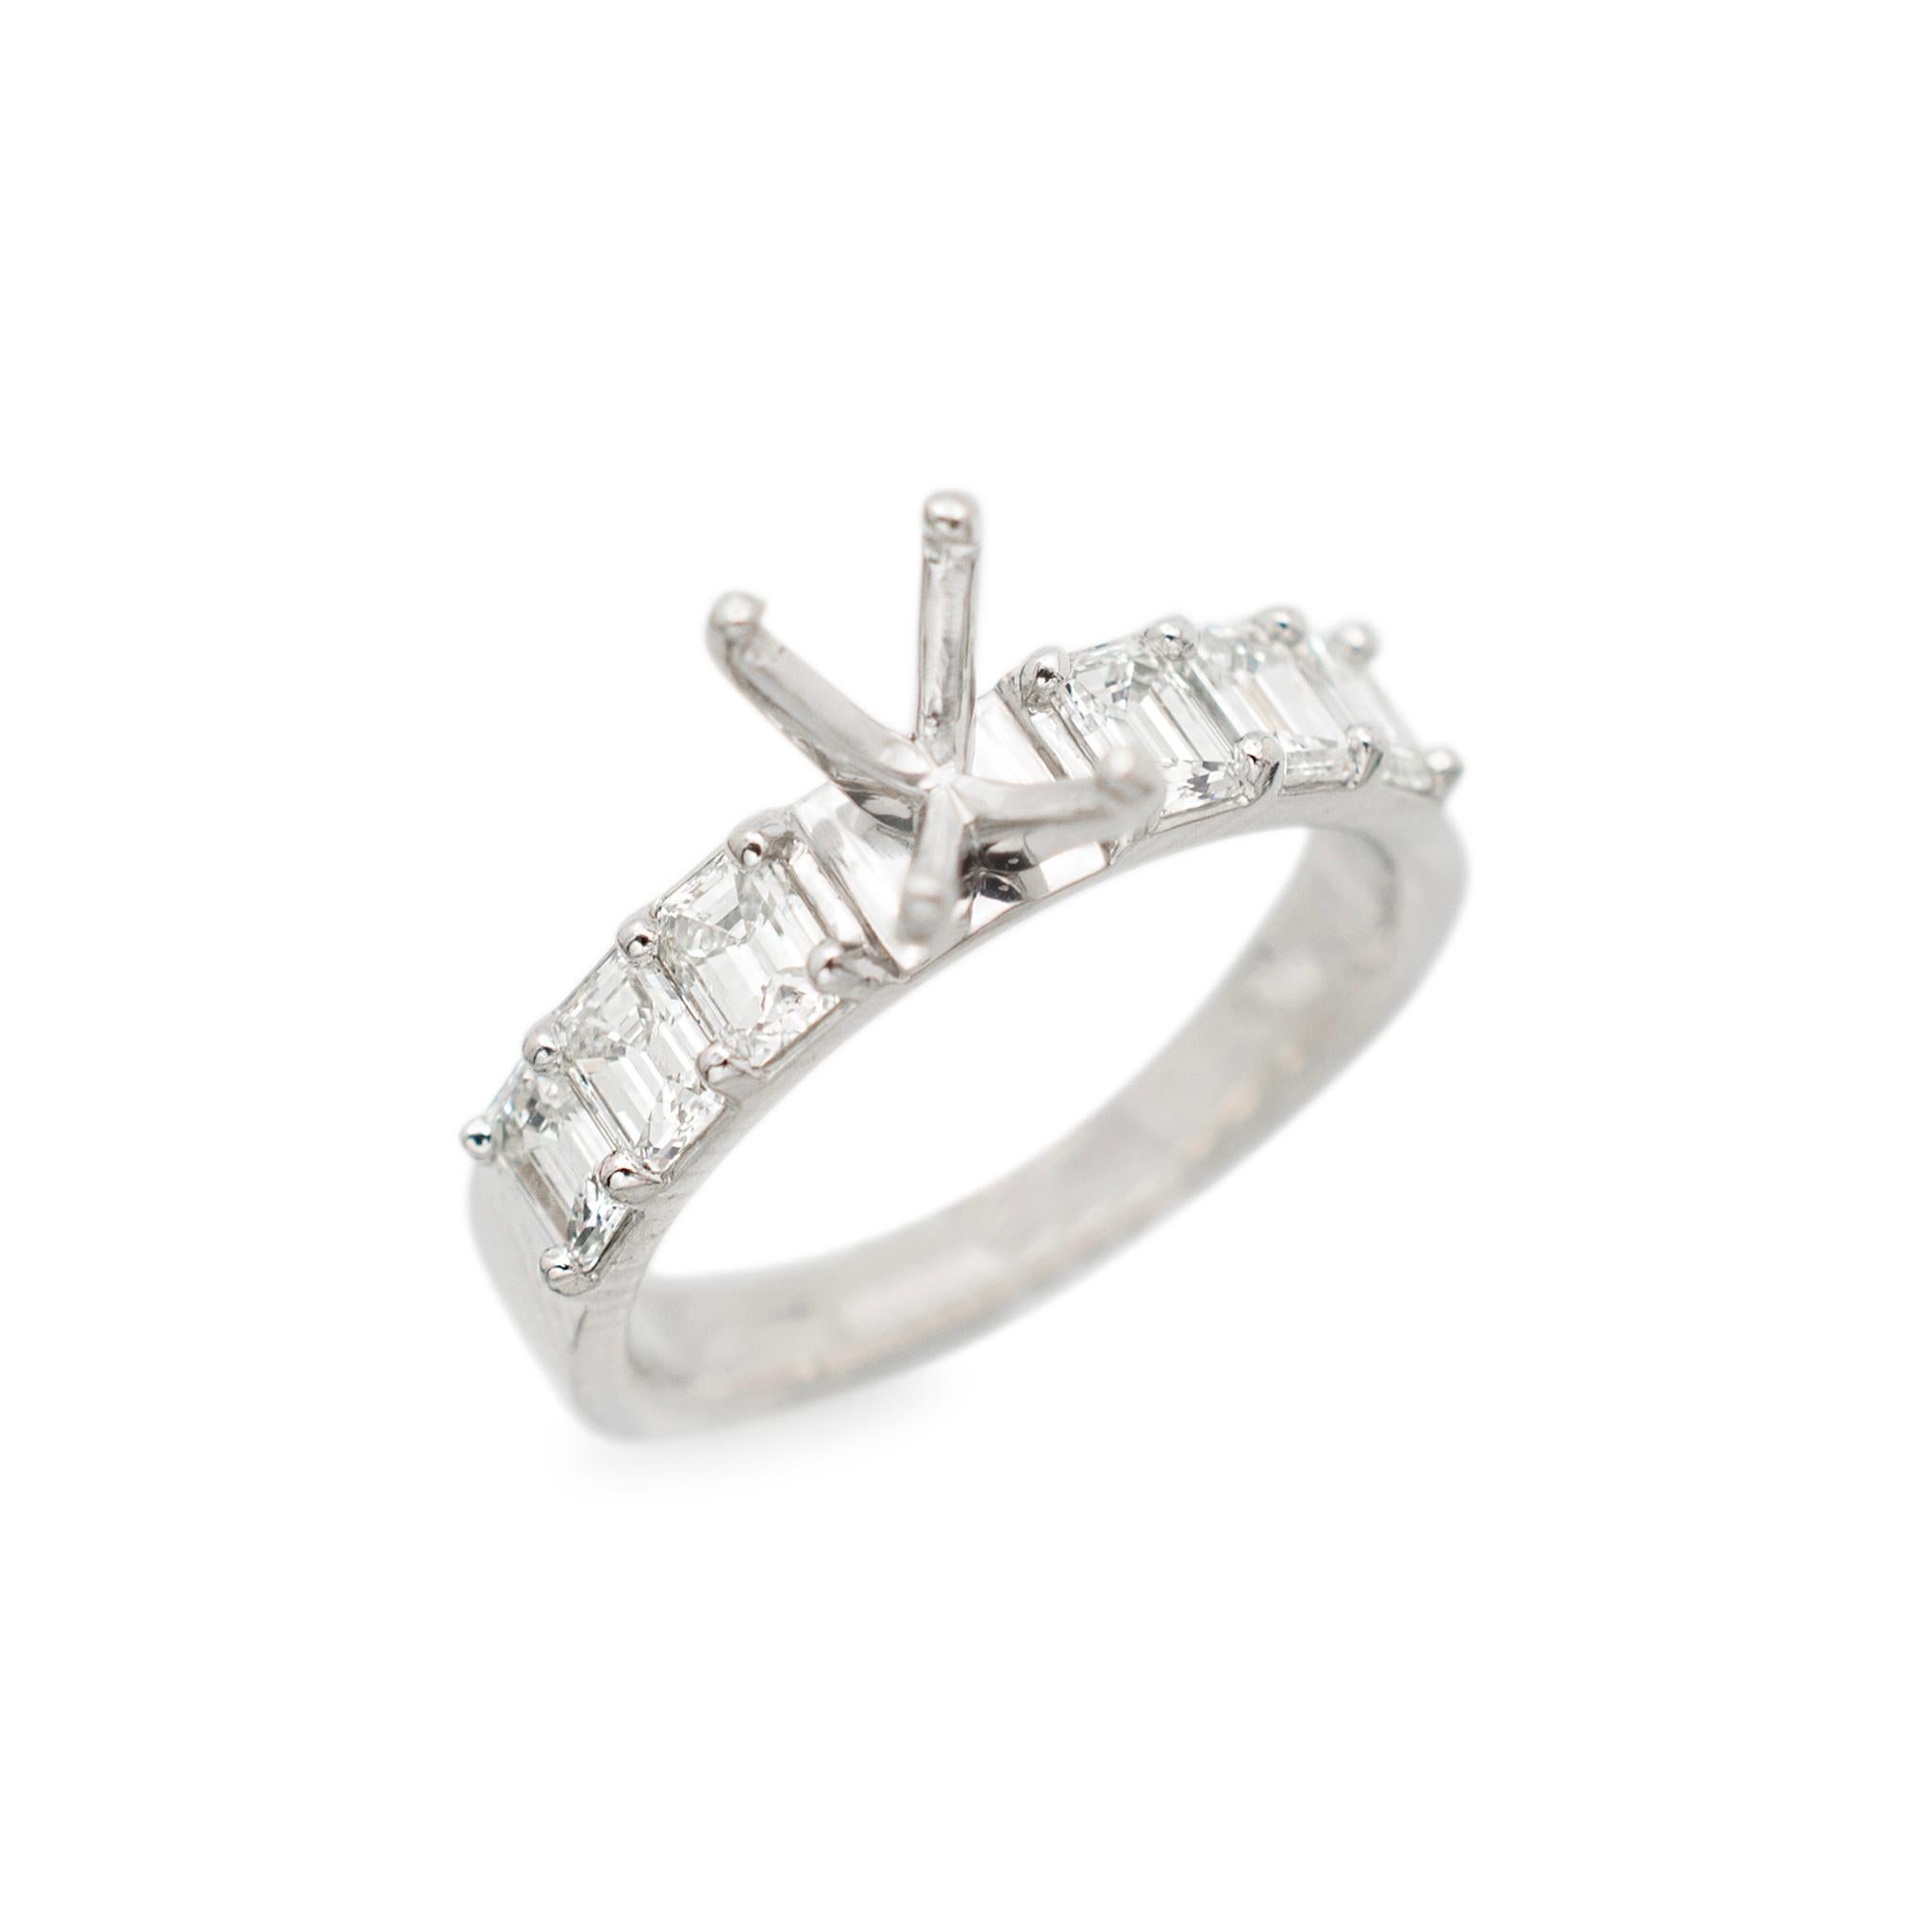 Gender: Ladies

Metal Type: 950 platinum

Ring Size: 6

Weight: 6.04 grams

Ladies custom-made polished 950 platinum, diamond engagement, semi-mount, accented ring with a tapered, comfort-fit shank. The metal was tested and determined to be 950